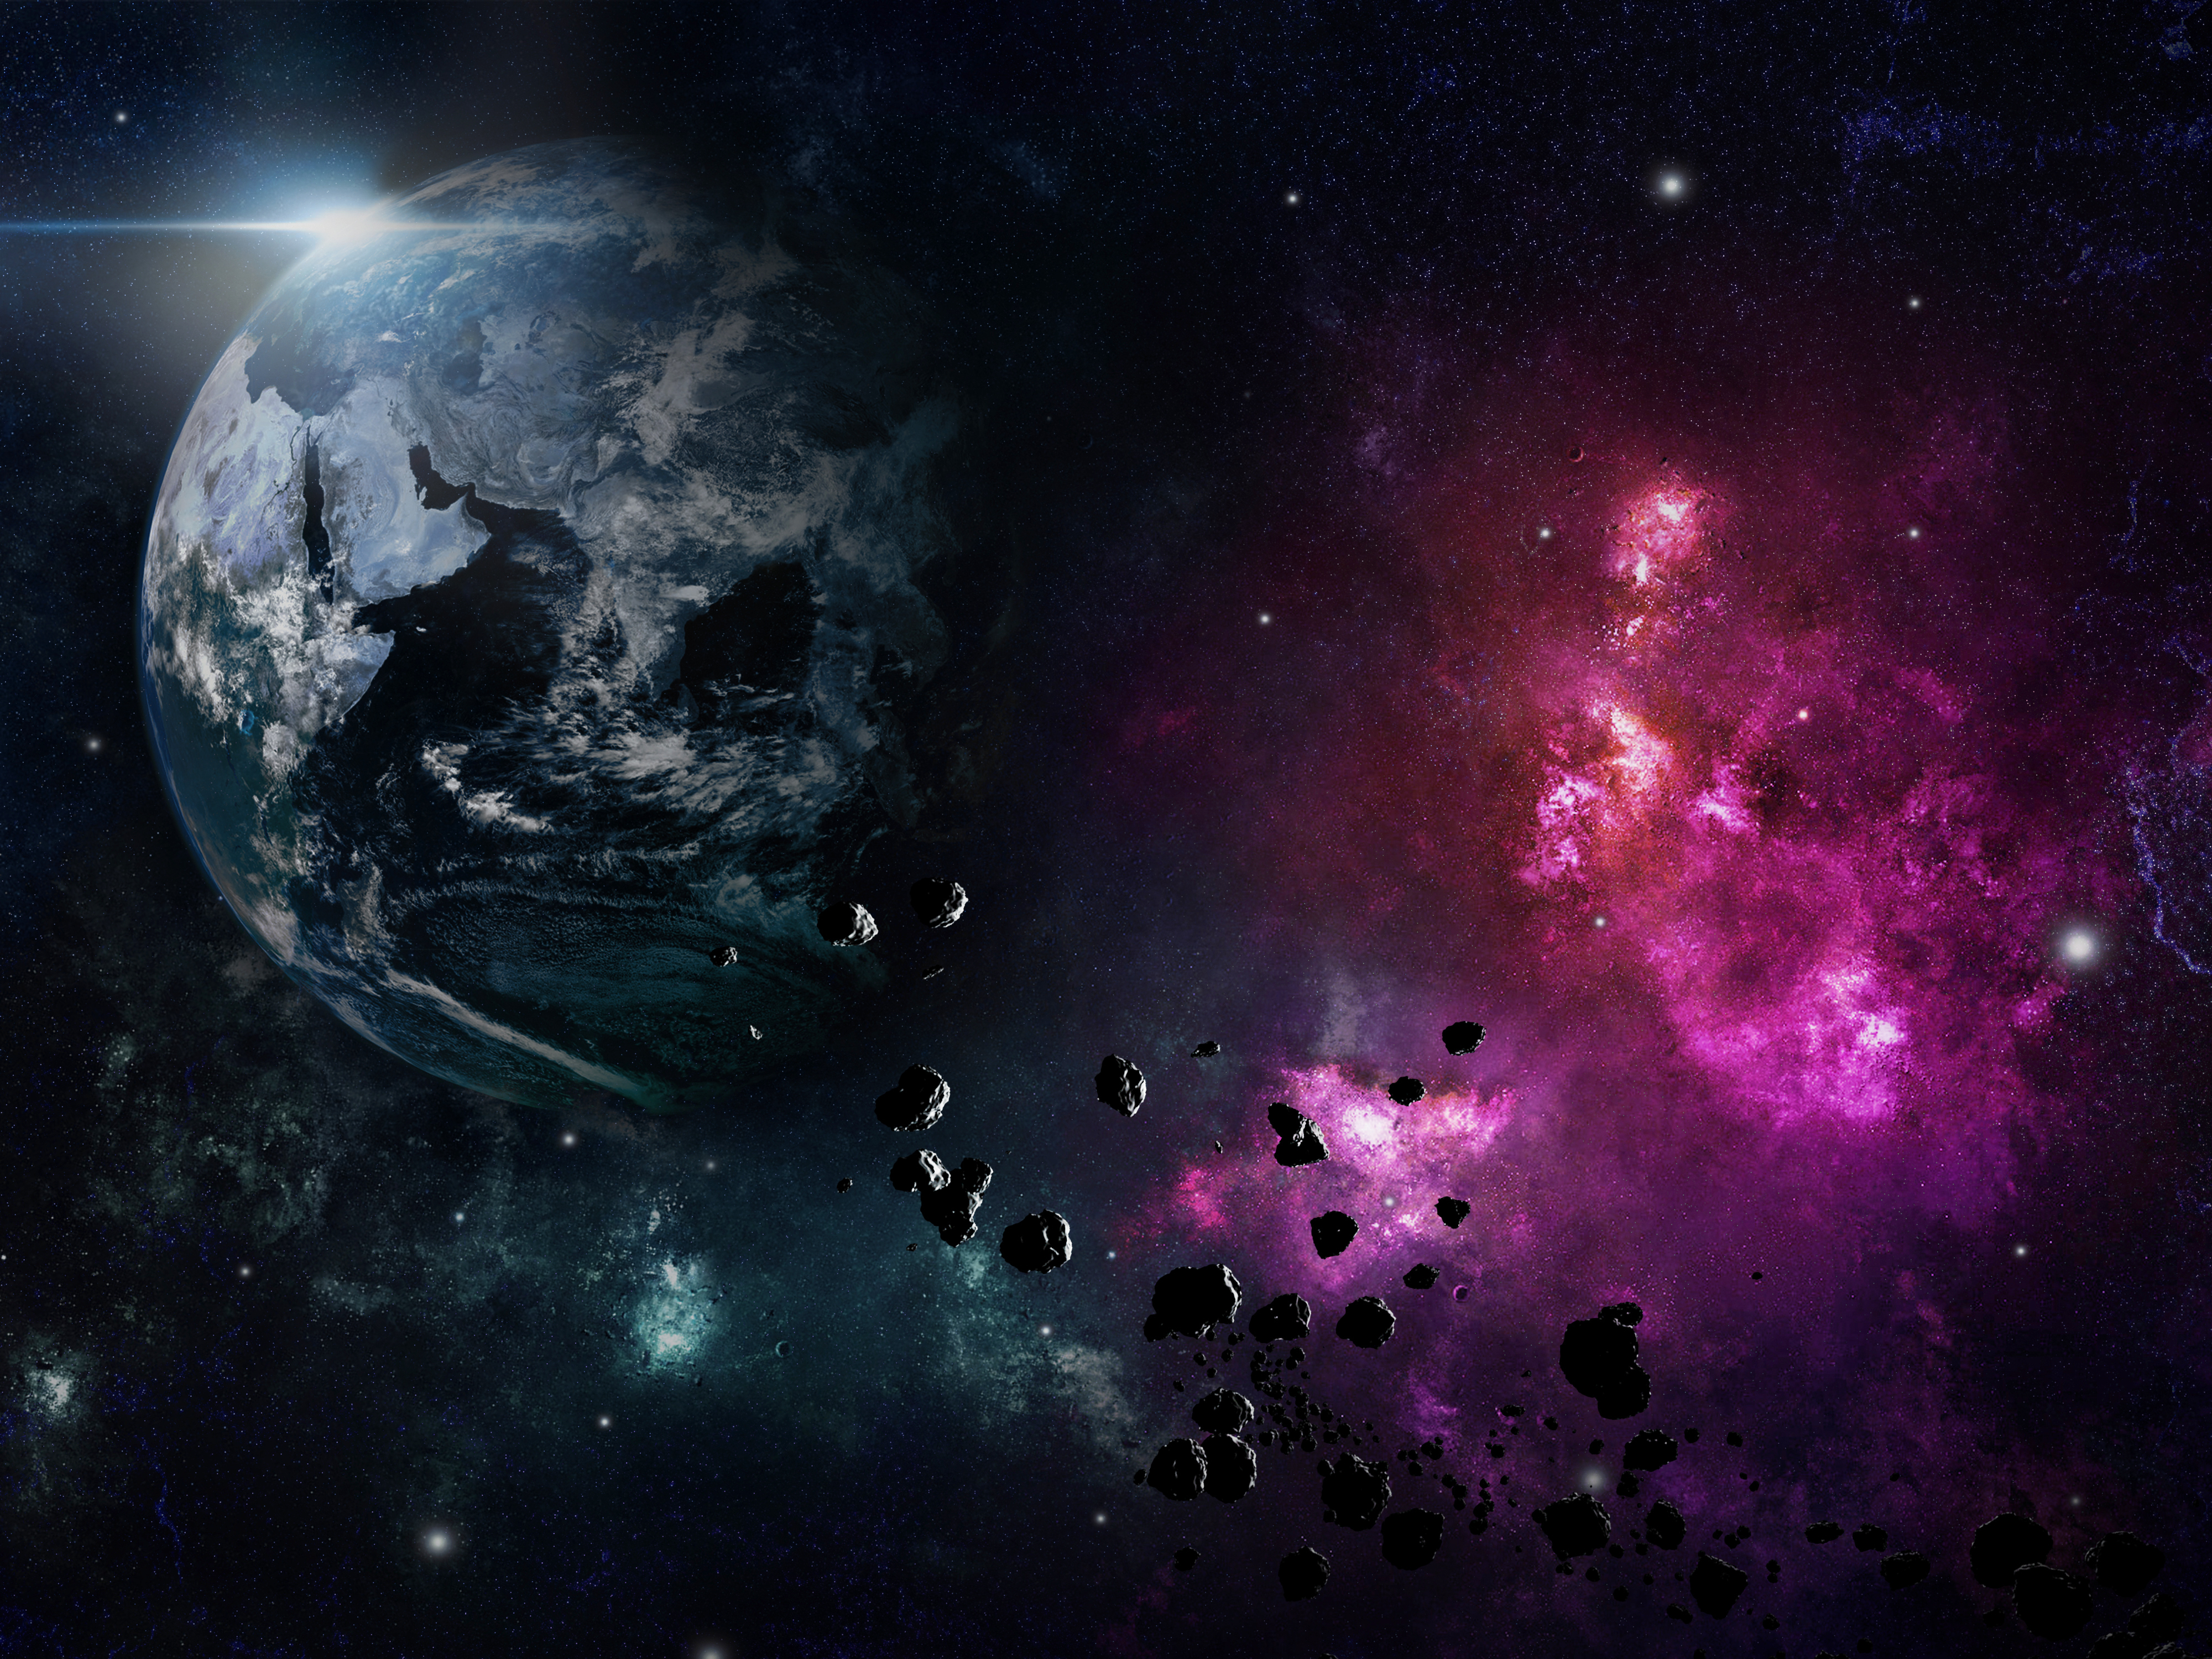  Space  4k  Ultra HD Wallpaper  Background Image 4000x3000 